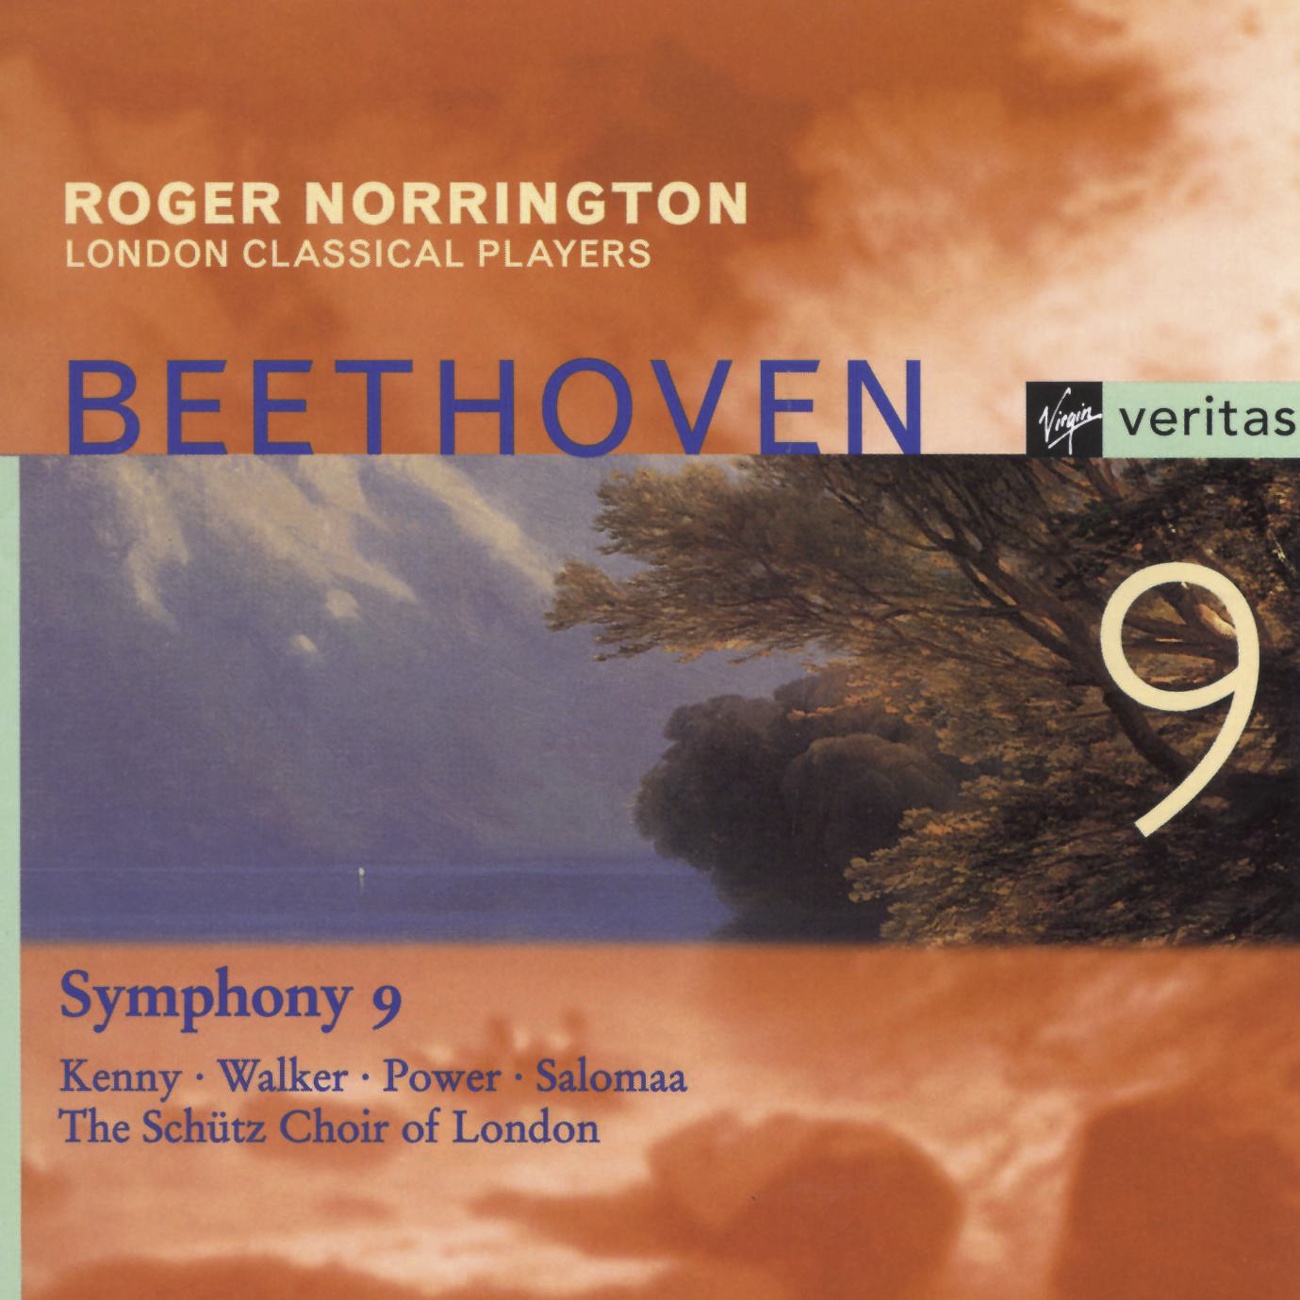 BEETHOVEN: SYMPHONY NO. 9 IN D-MIN, OP 125 'CHORAL': II. MOLTO VIVACE